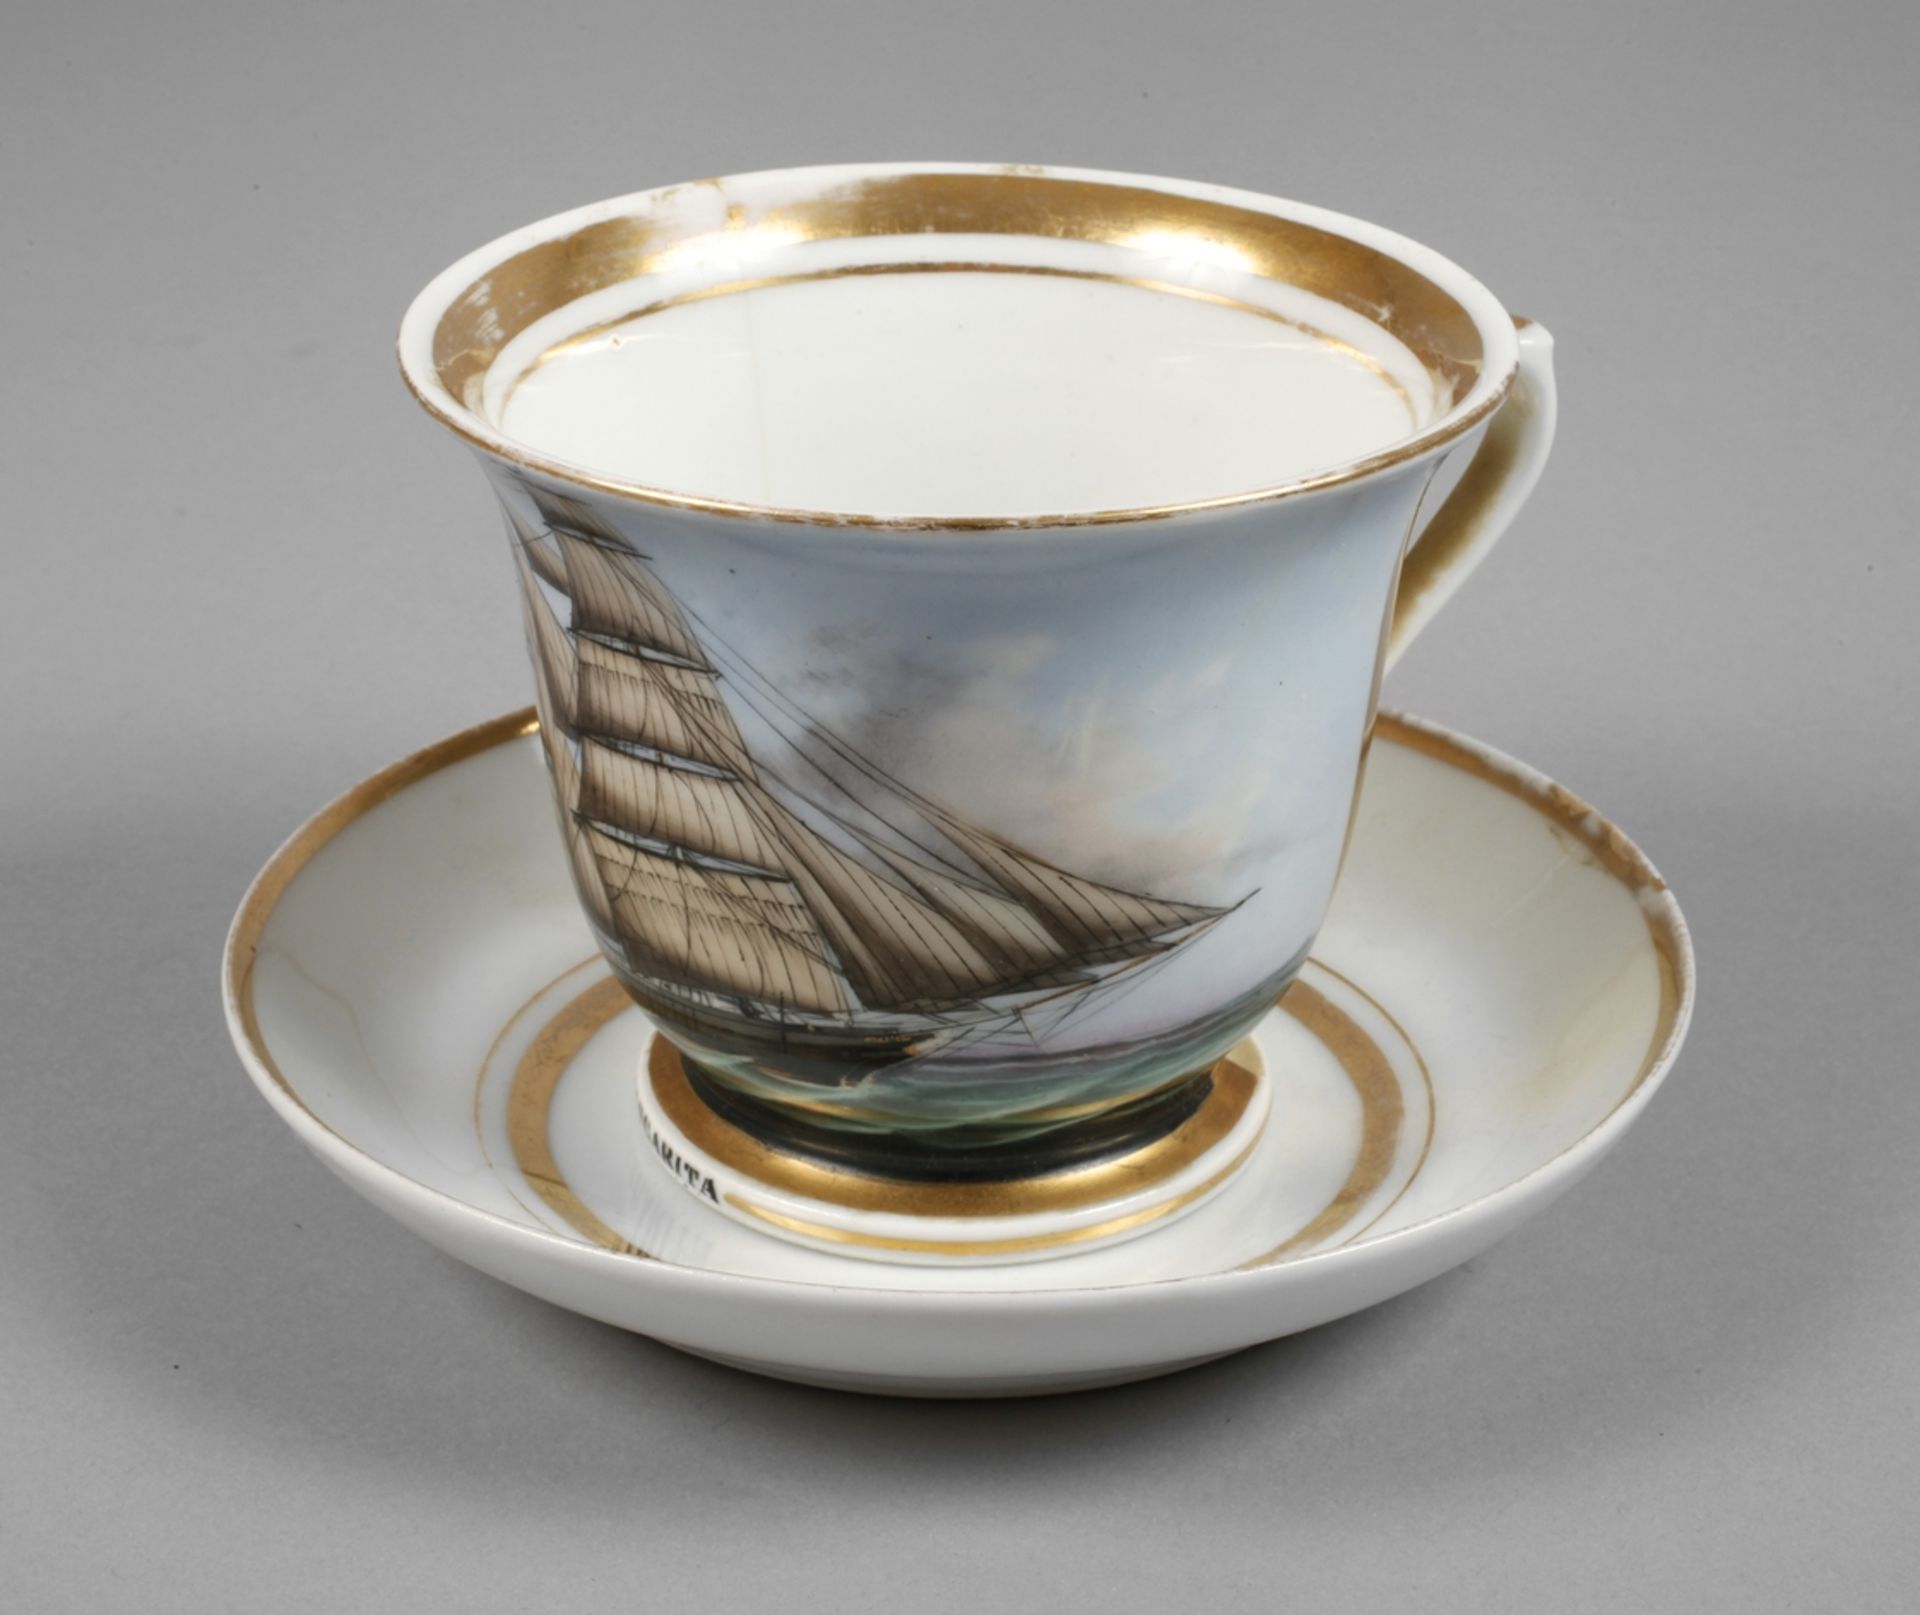 Captain's cup with sailing ship "Margarita"